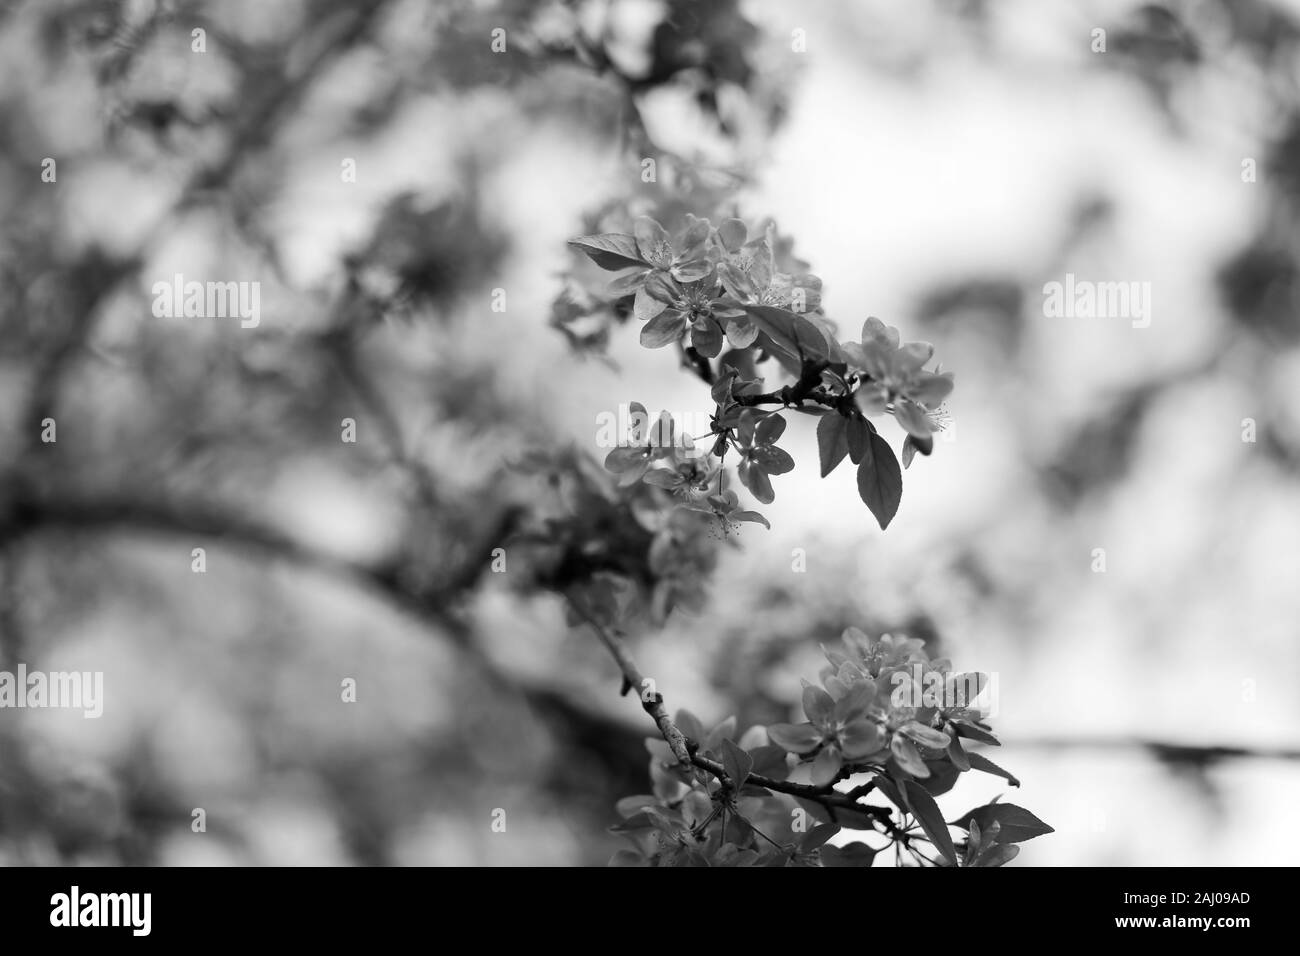 Nature background with wonderful blossomed spring flowers on tree branches. Natural beauty. Black and white photography Stock Photo